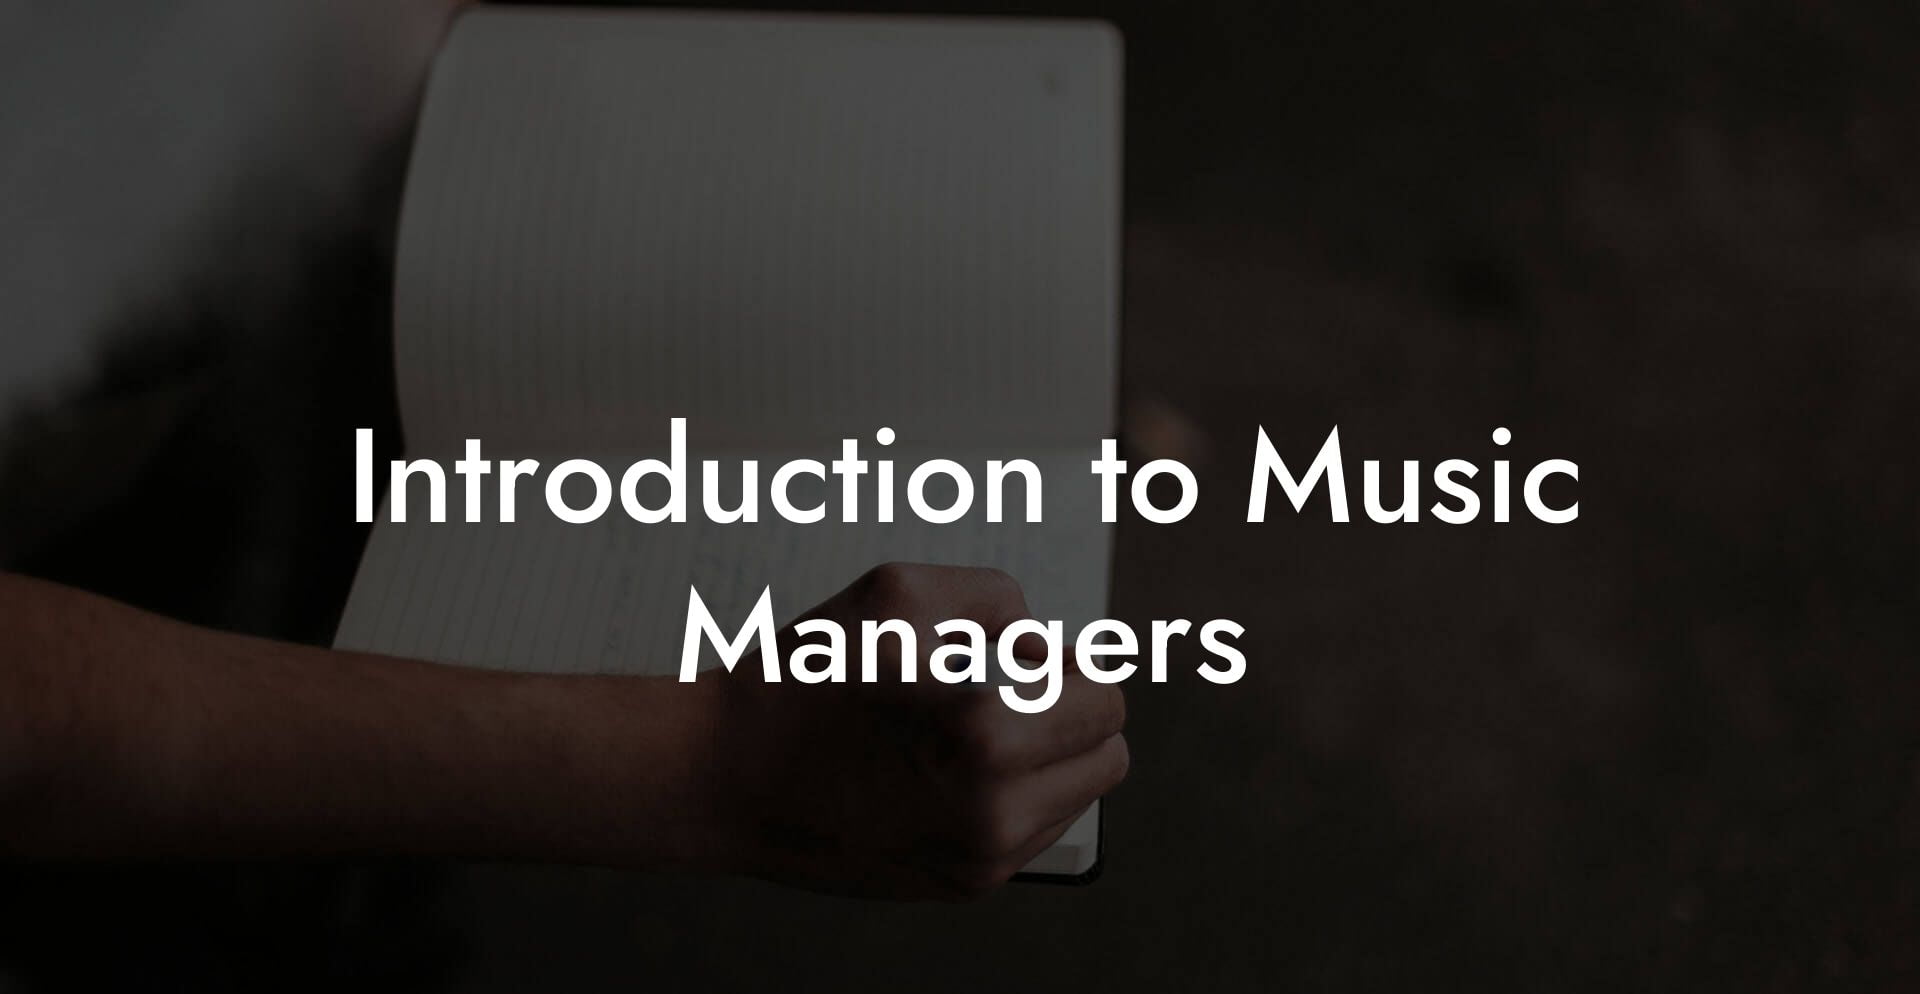 Introduction to Music Managers